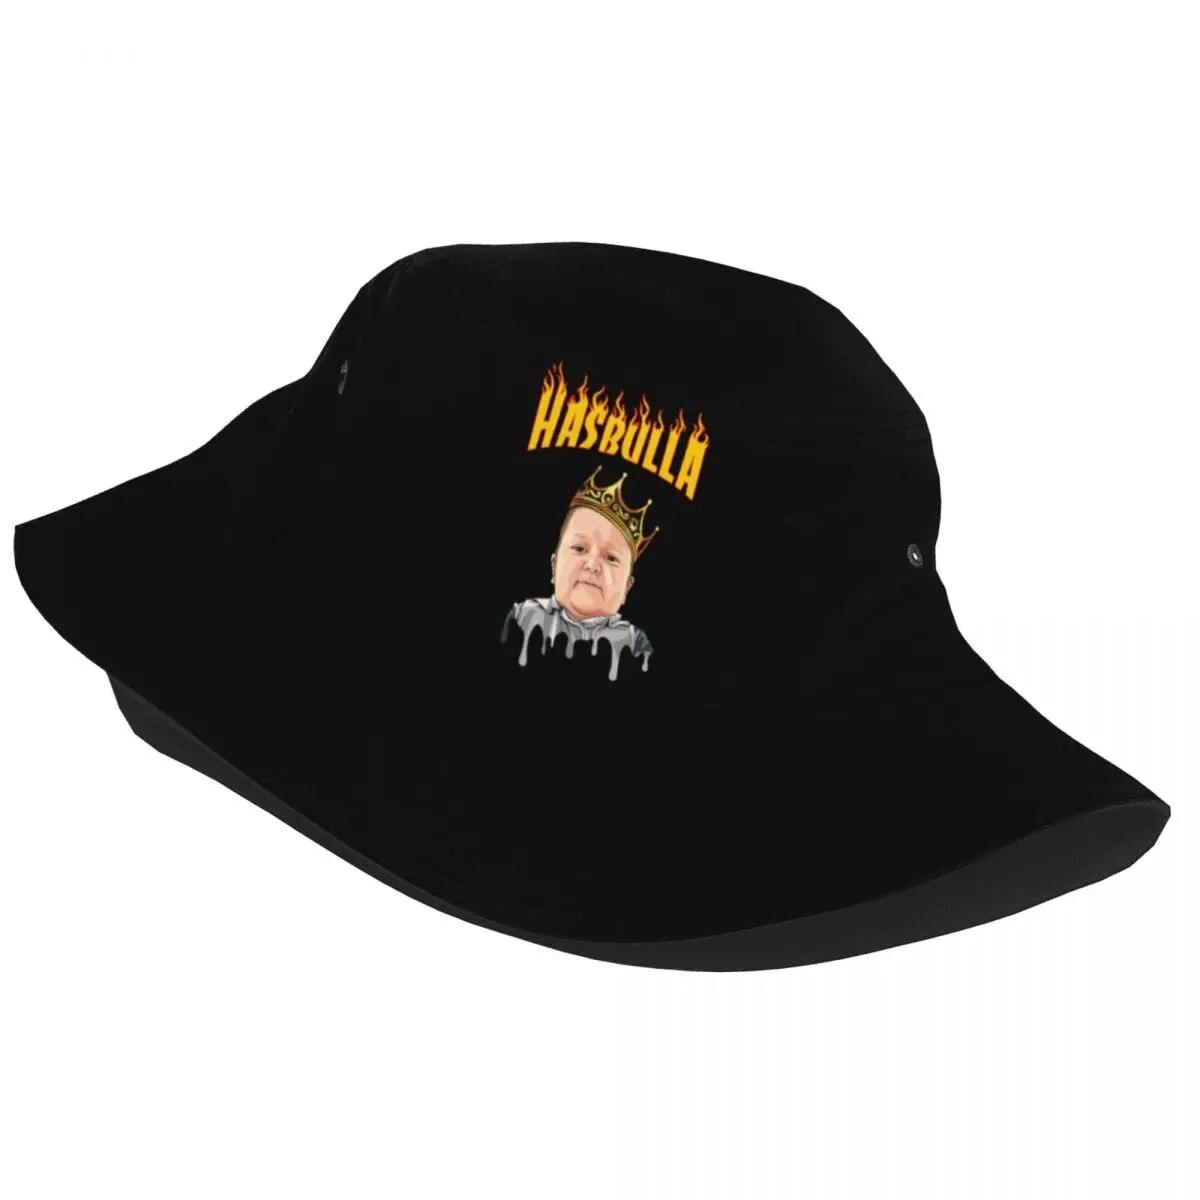 Hasbulla Bucket Hat - Silly Sausage Gifts